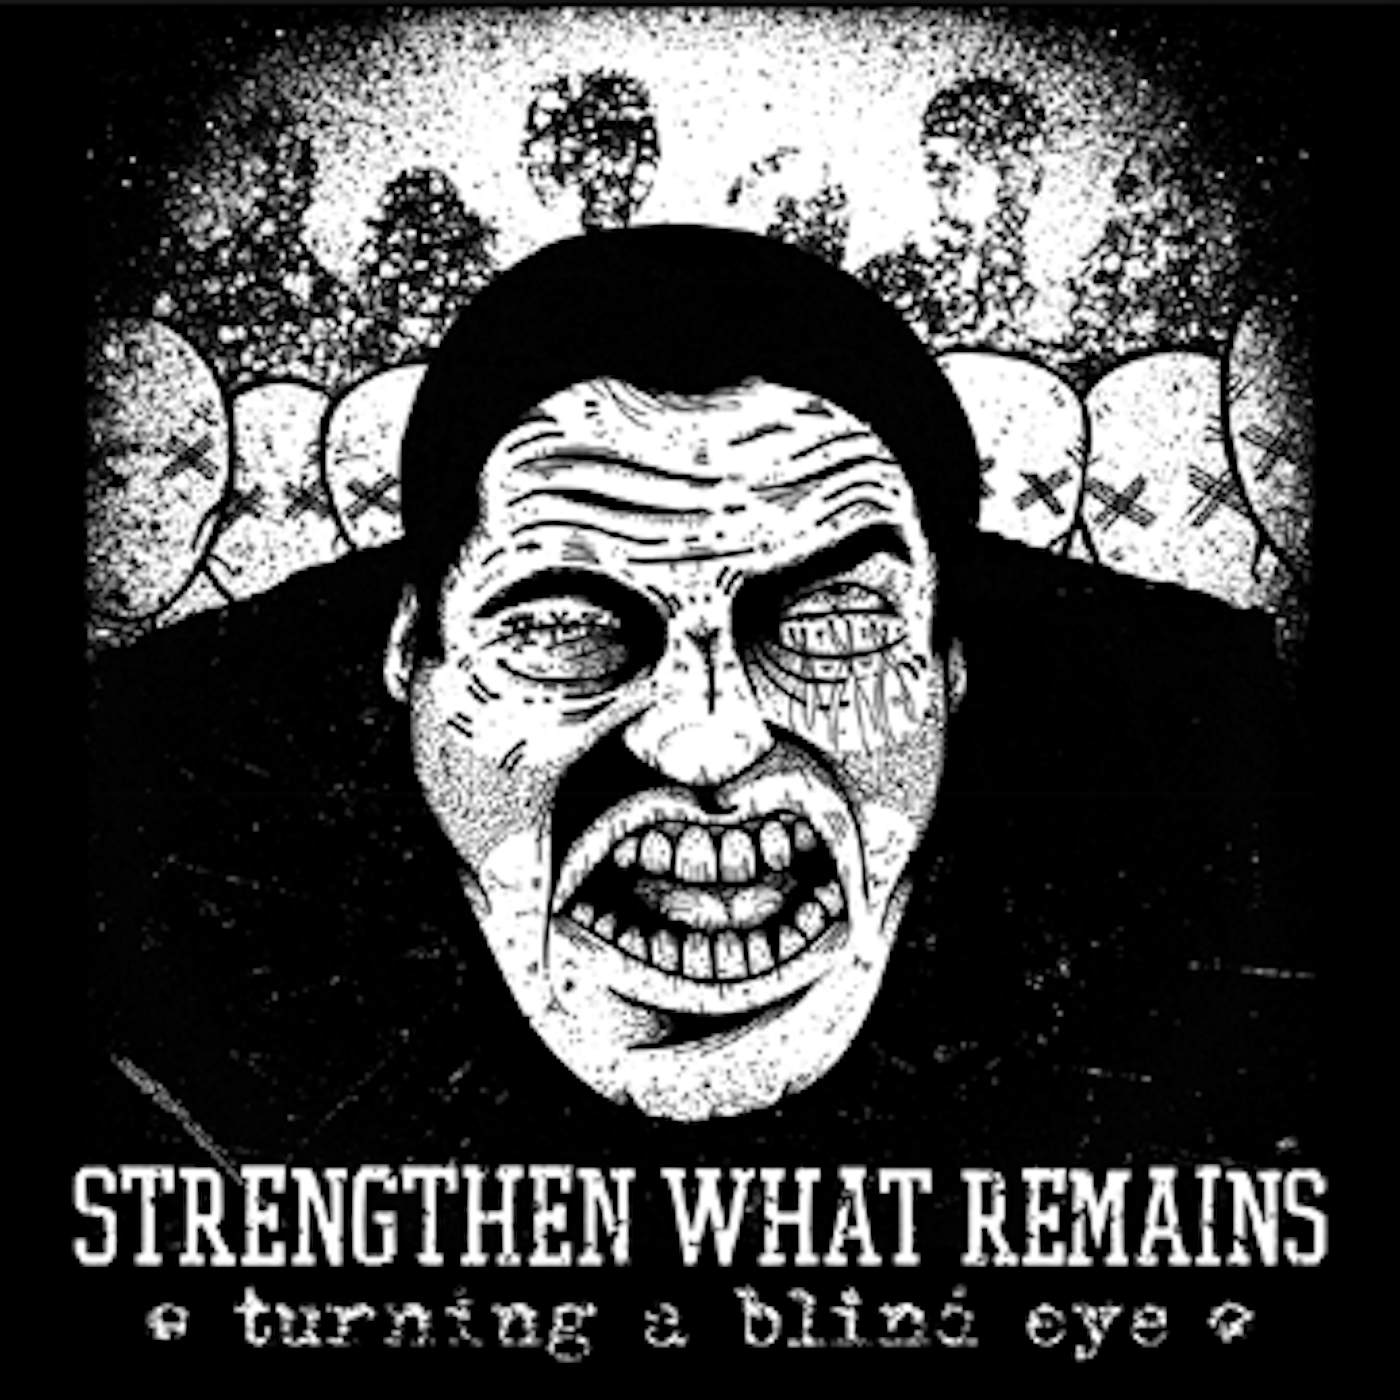 Strengthen What Remains TURNING A BLIND EYE Vinyl Record